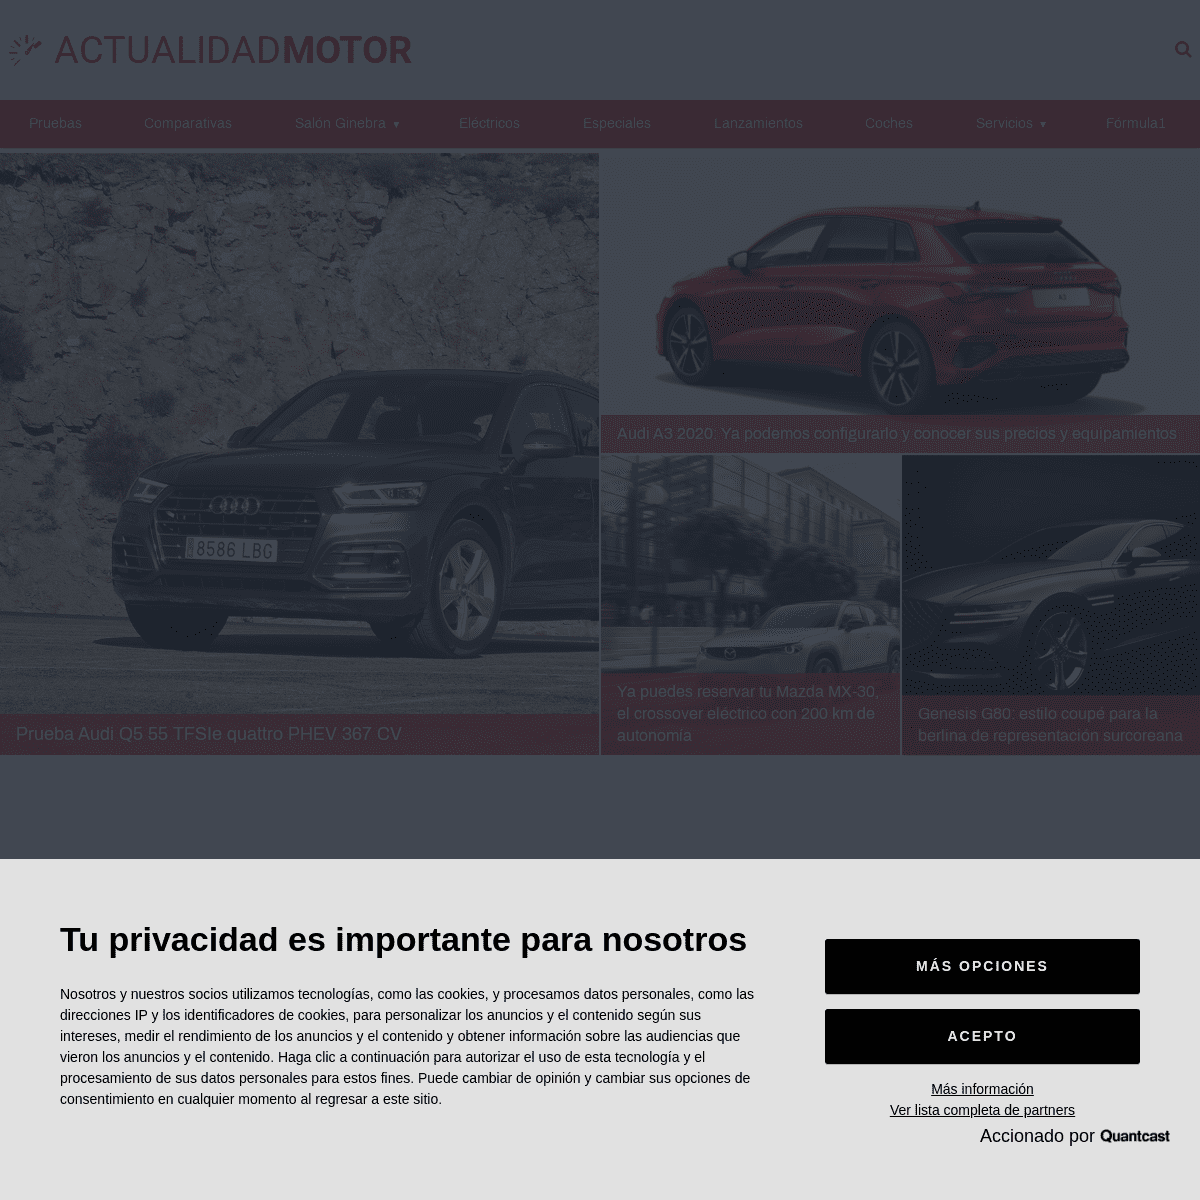 A complete backup of actualidadmotor.com